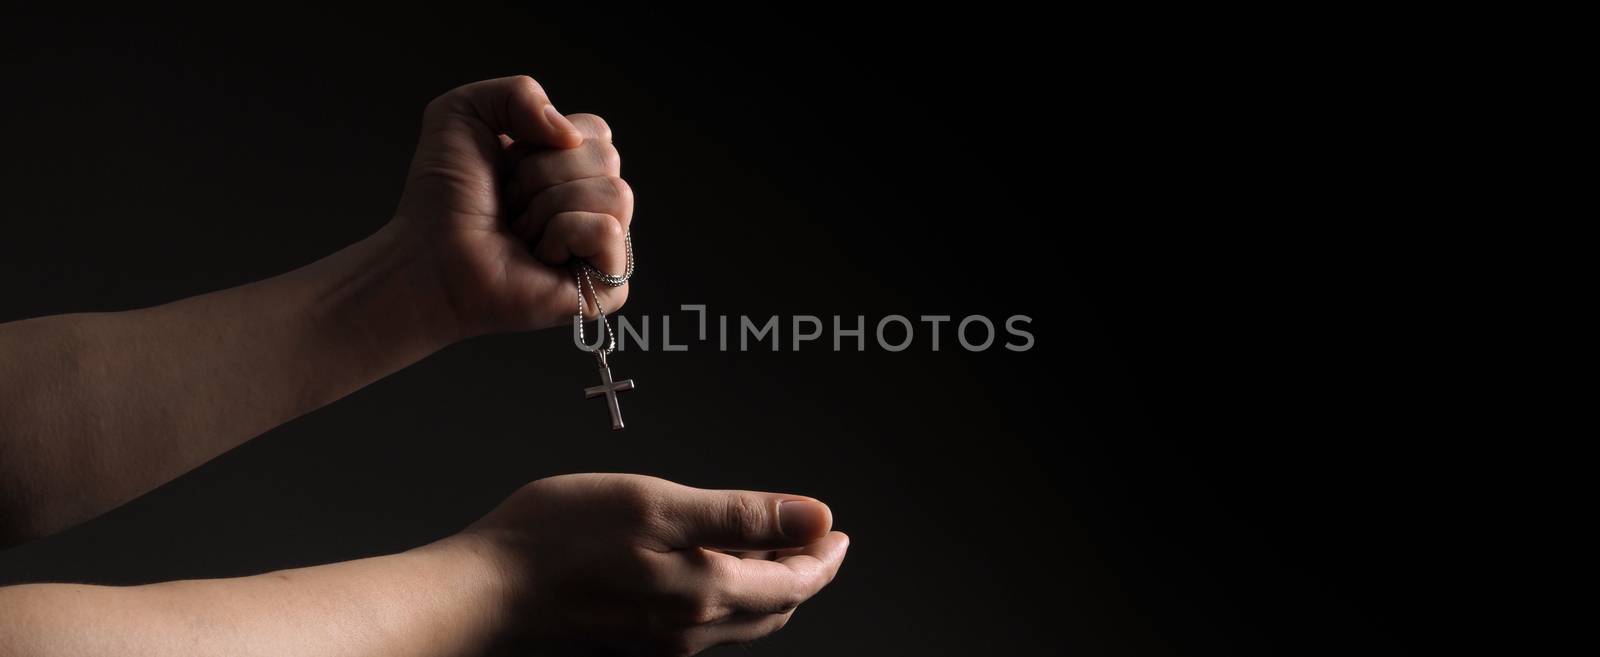 Crucifix pendant or cross sign made from silver and hold in man  by gnepphoto